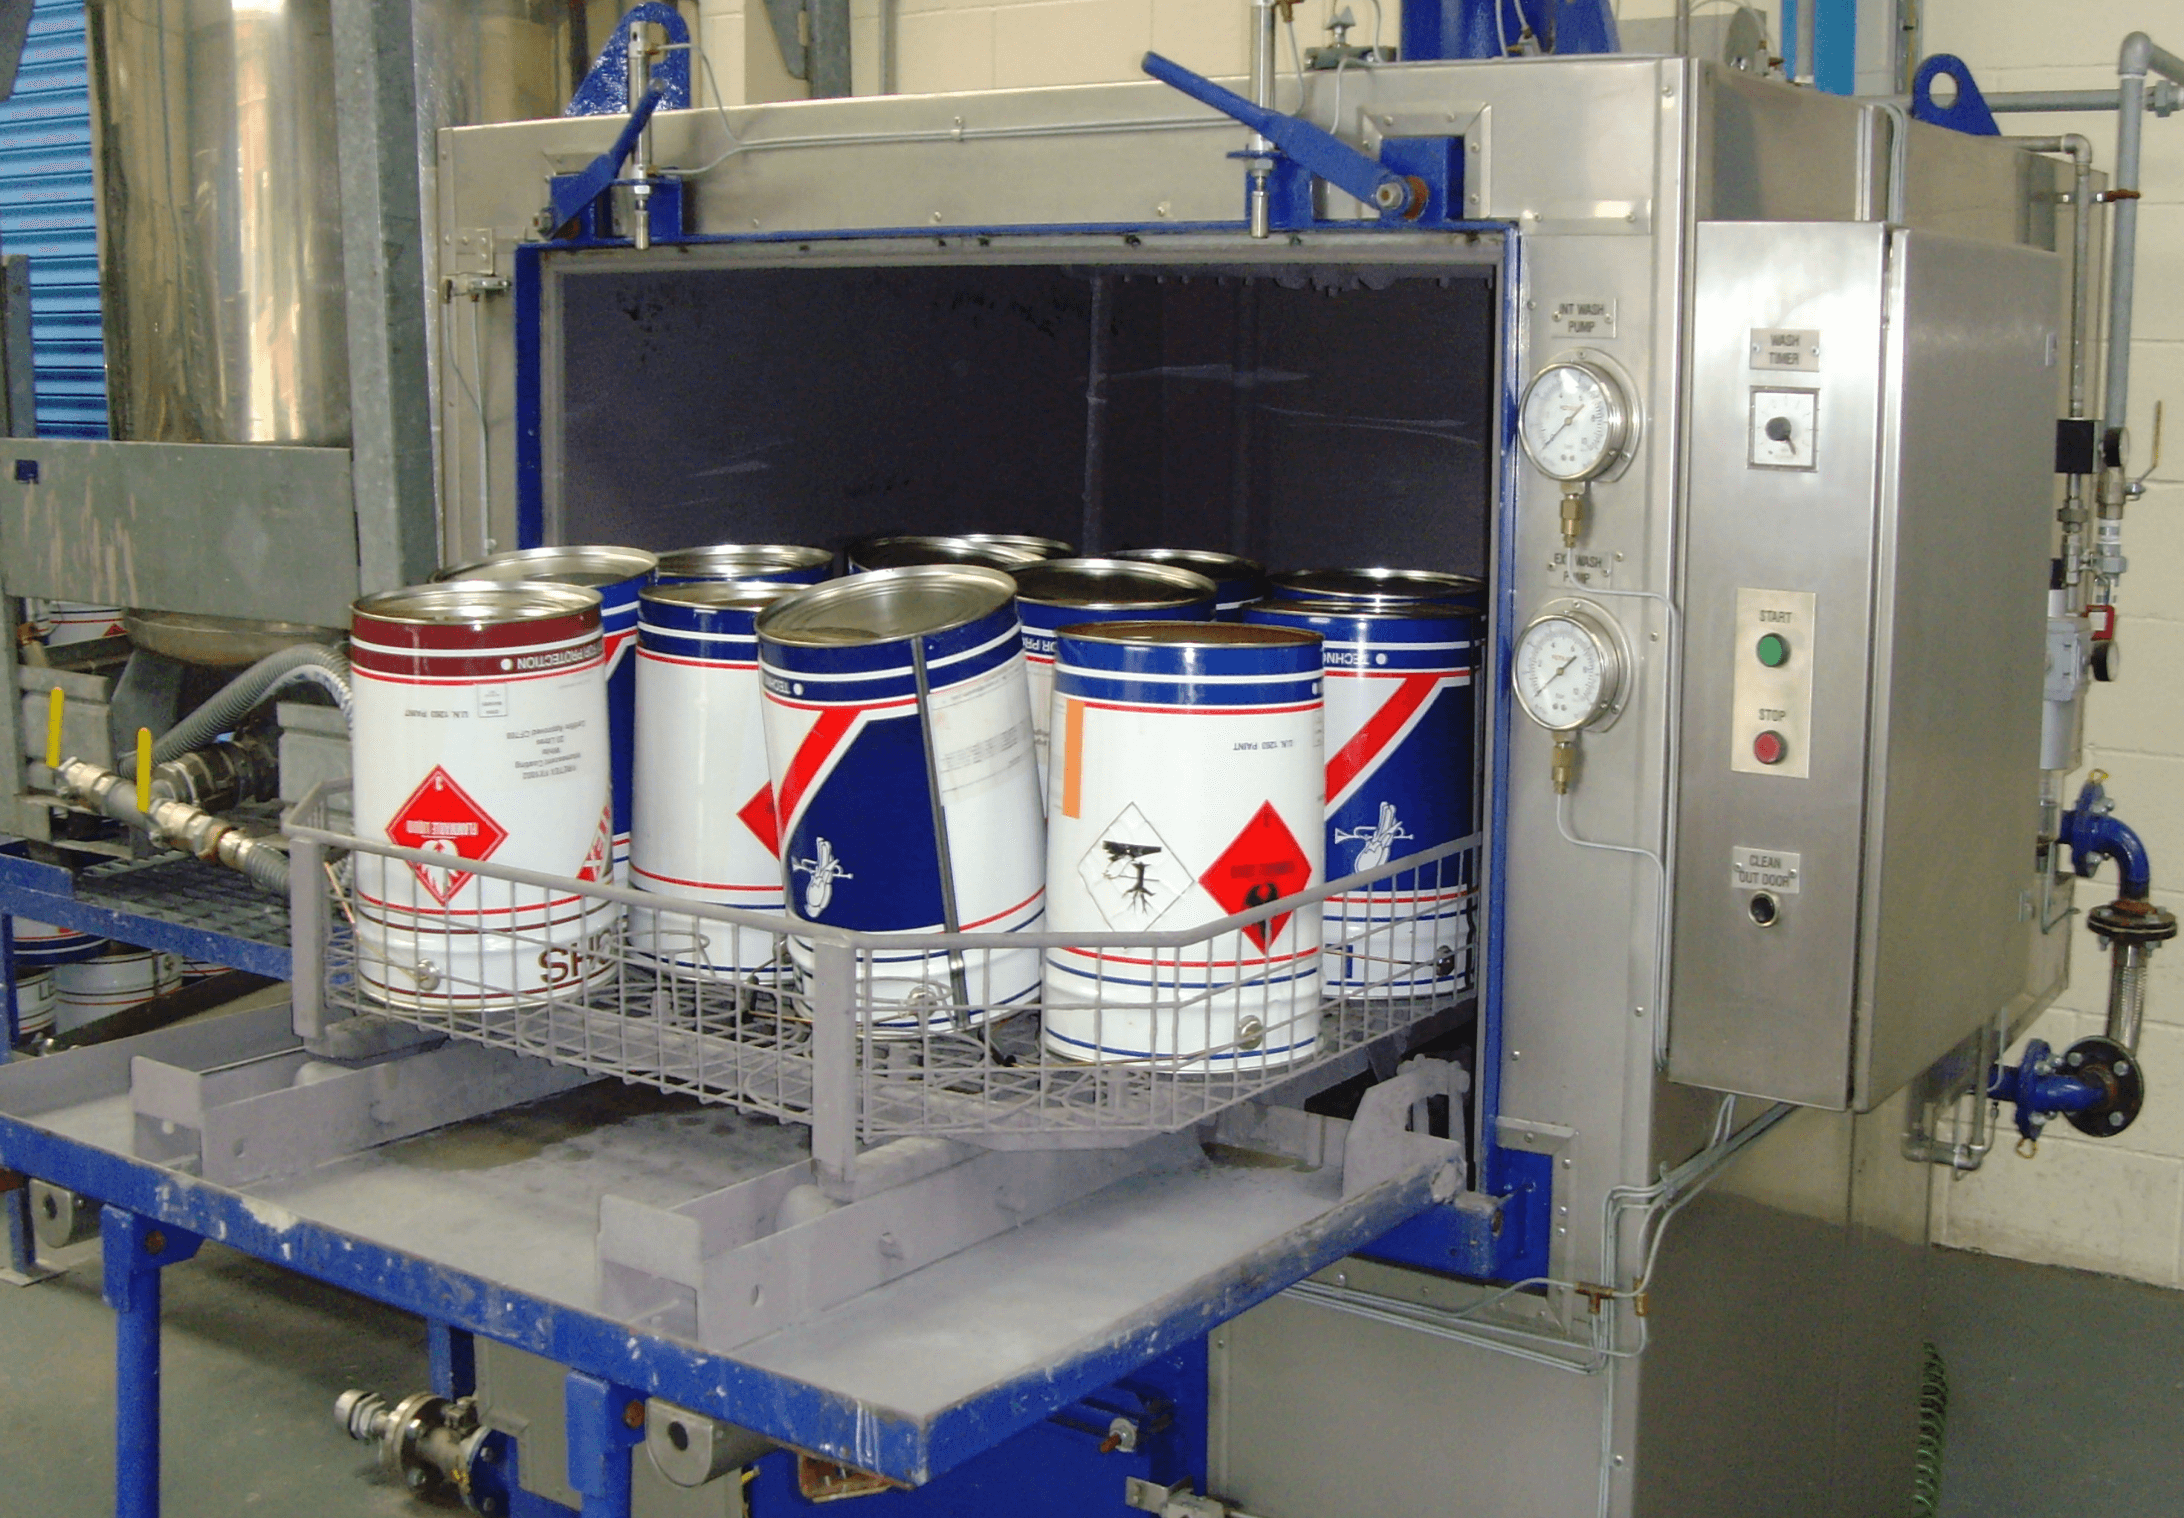 Pail washer for use with solvents